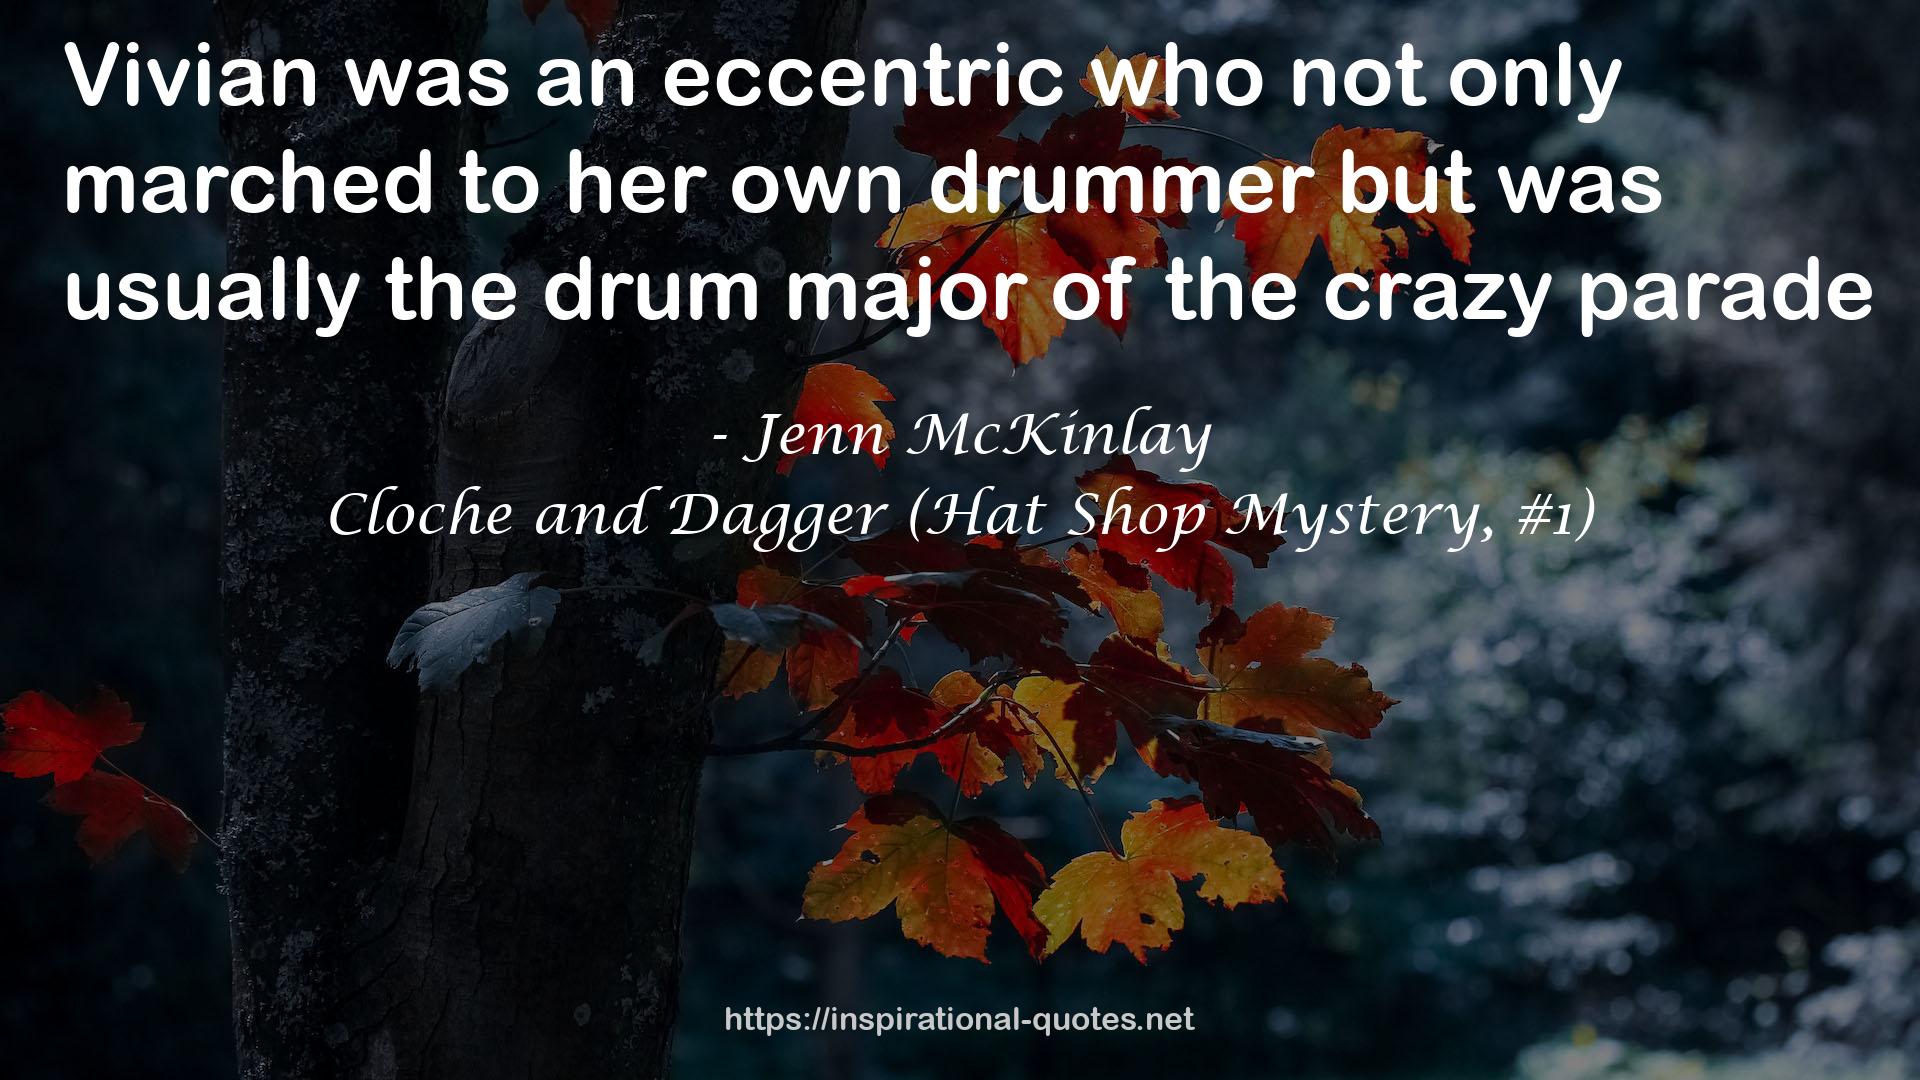 Cloche and Dagger (Hat Shop Mystery, #1) QUOTES